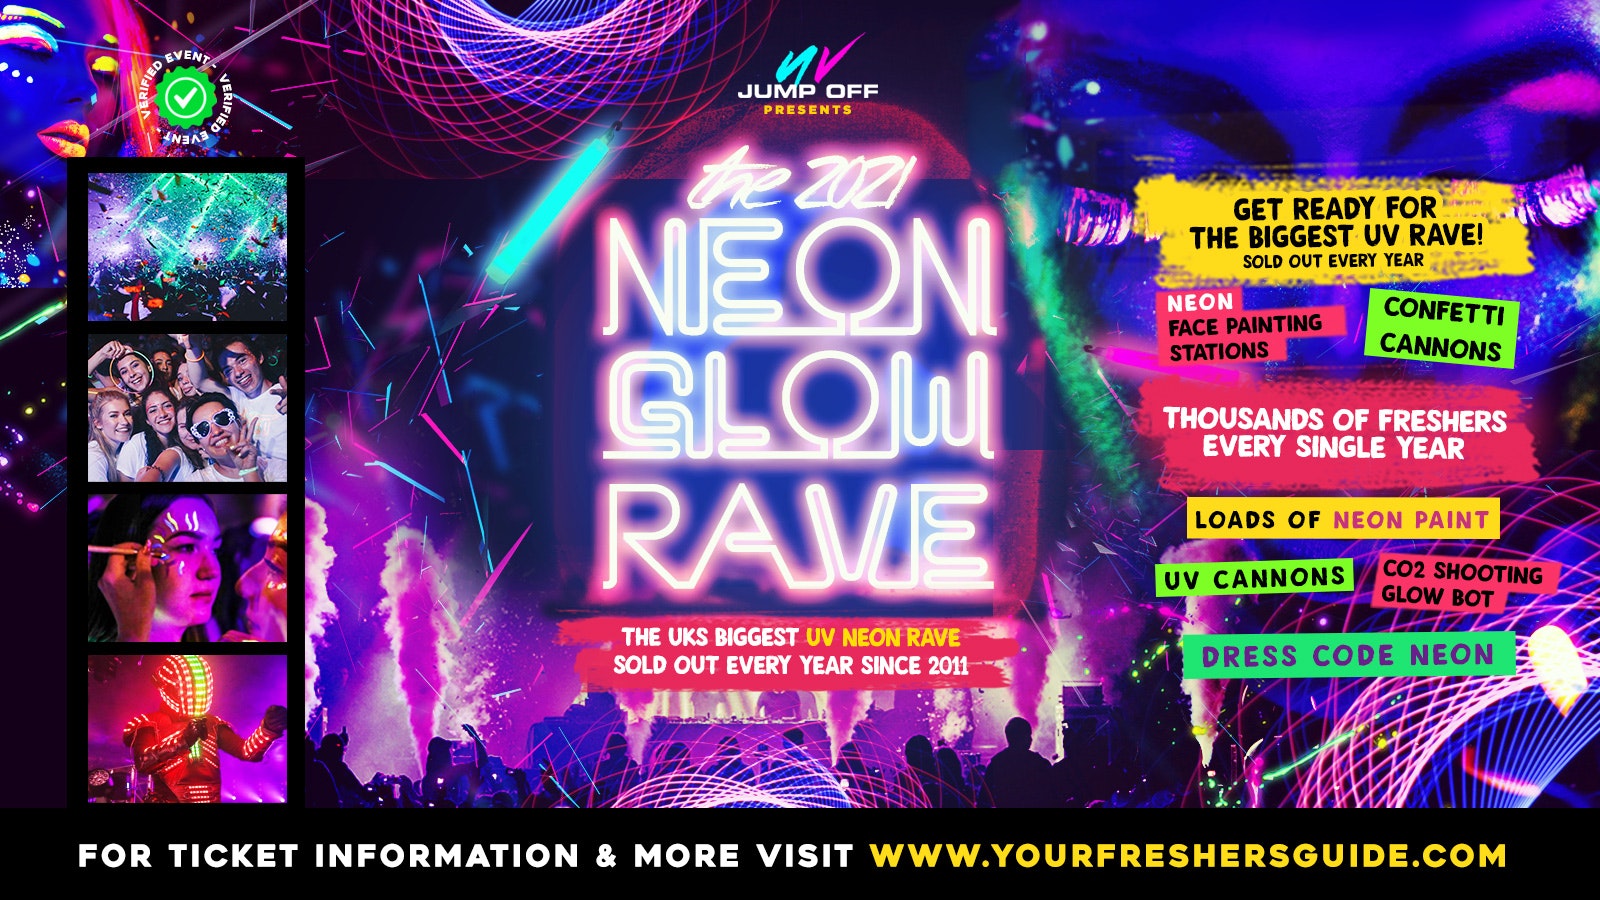 Neon Glow Rave | Surrey Freshers 2021 // Guildford Freshers 2021 – Tickets from £3!